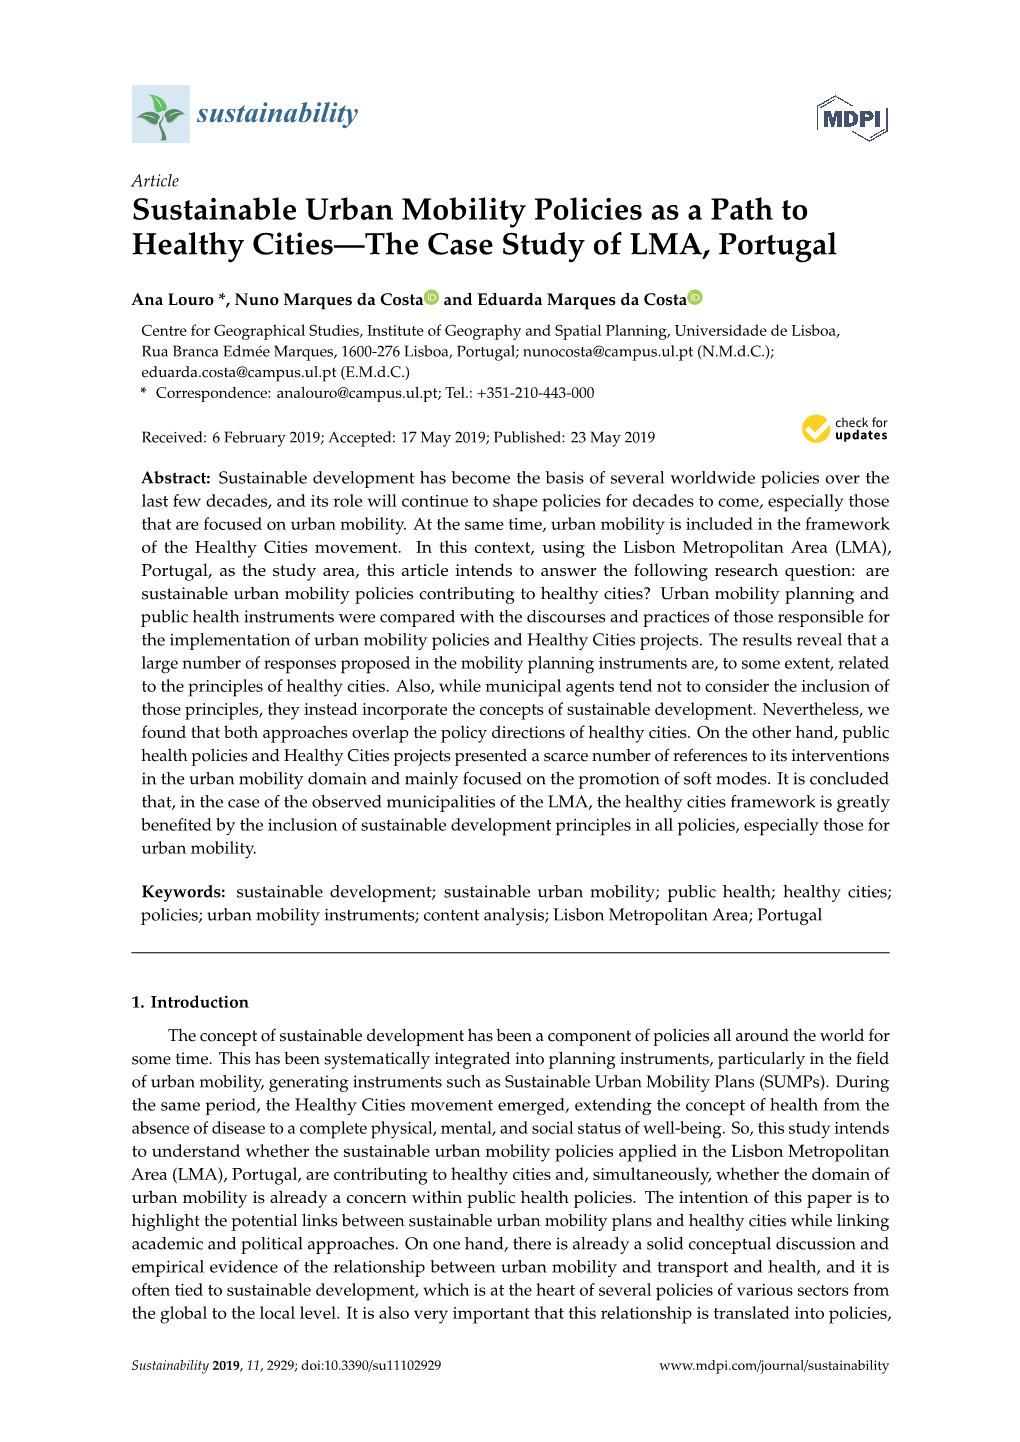 Sustainable Urban Mobility Policies As a Path to Healthy Cities—The Case Study of LMA, Portugal